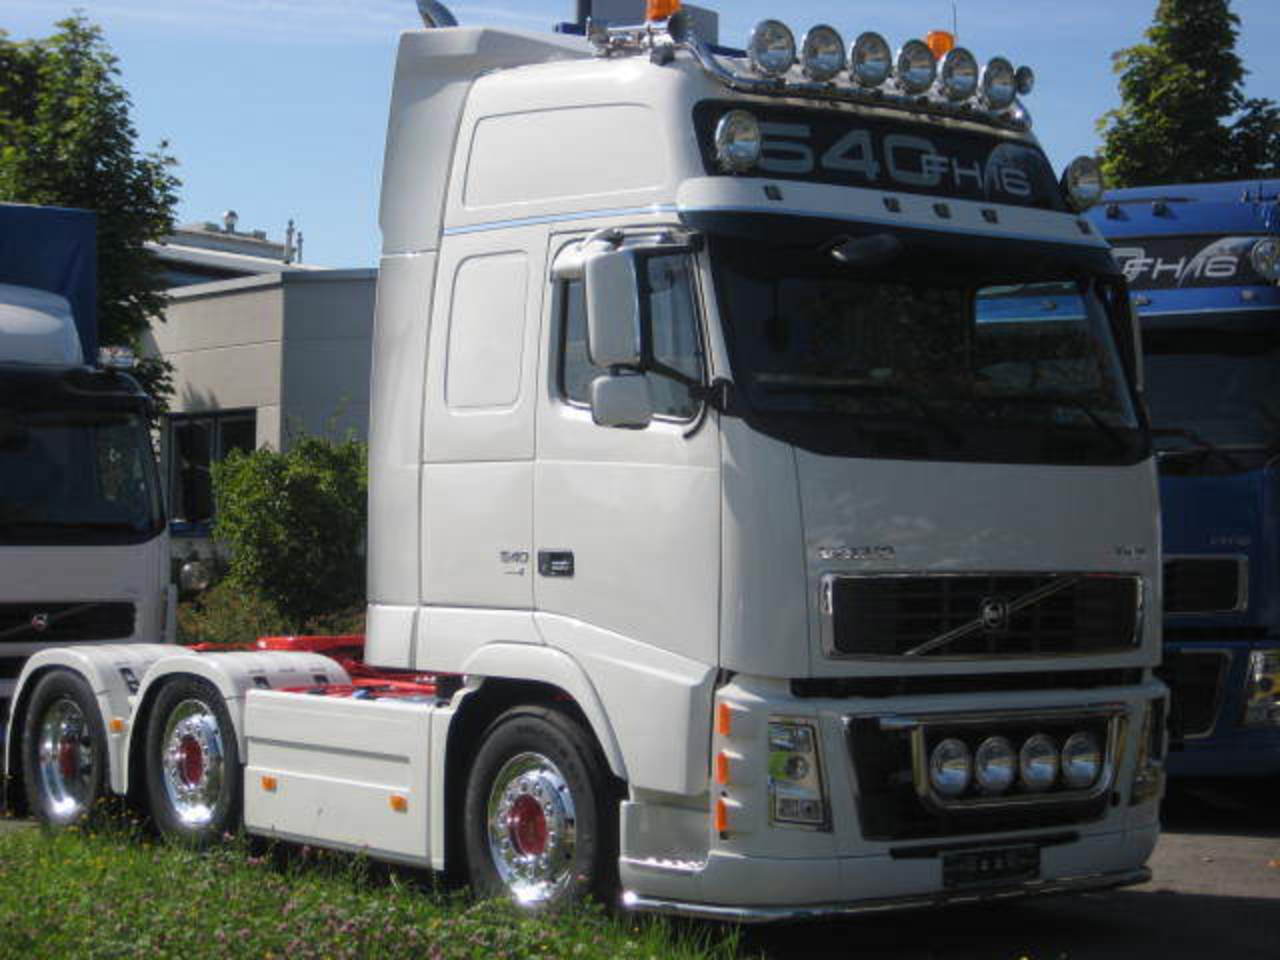 Volvo FH16 540 6X2. View Download Wallpaper. 640x480. Comments